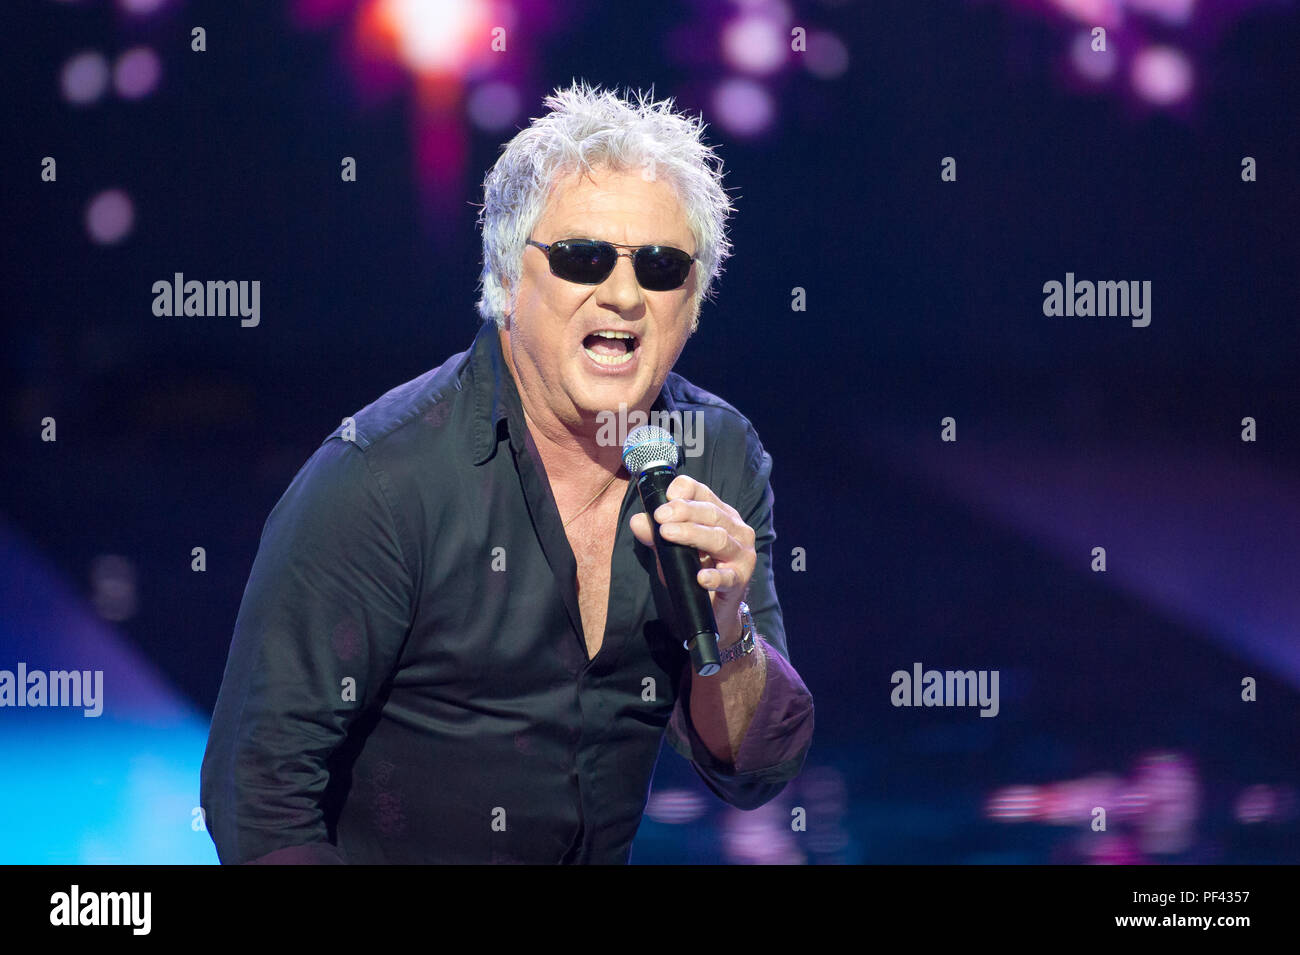 Marcel Kapteijn of Ten Sharp in concert at Top Of The Top 2018 Sopot  Festival in Opera Lesna (Forest Opera) in Sopot, Poland. August 14th 2018 ©  Wojci Stock Photo - Alamy